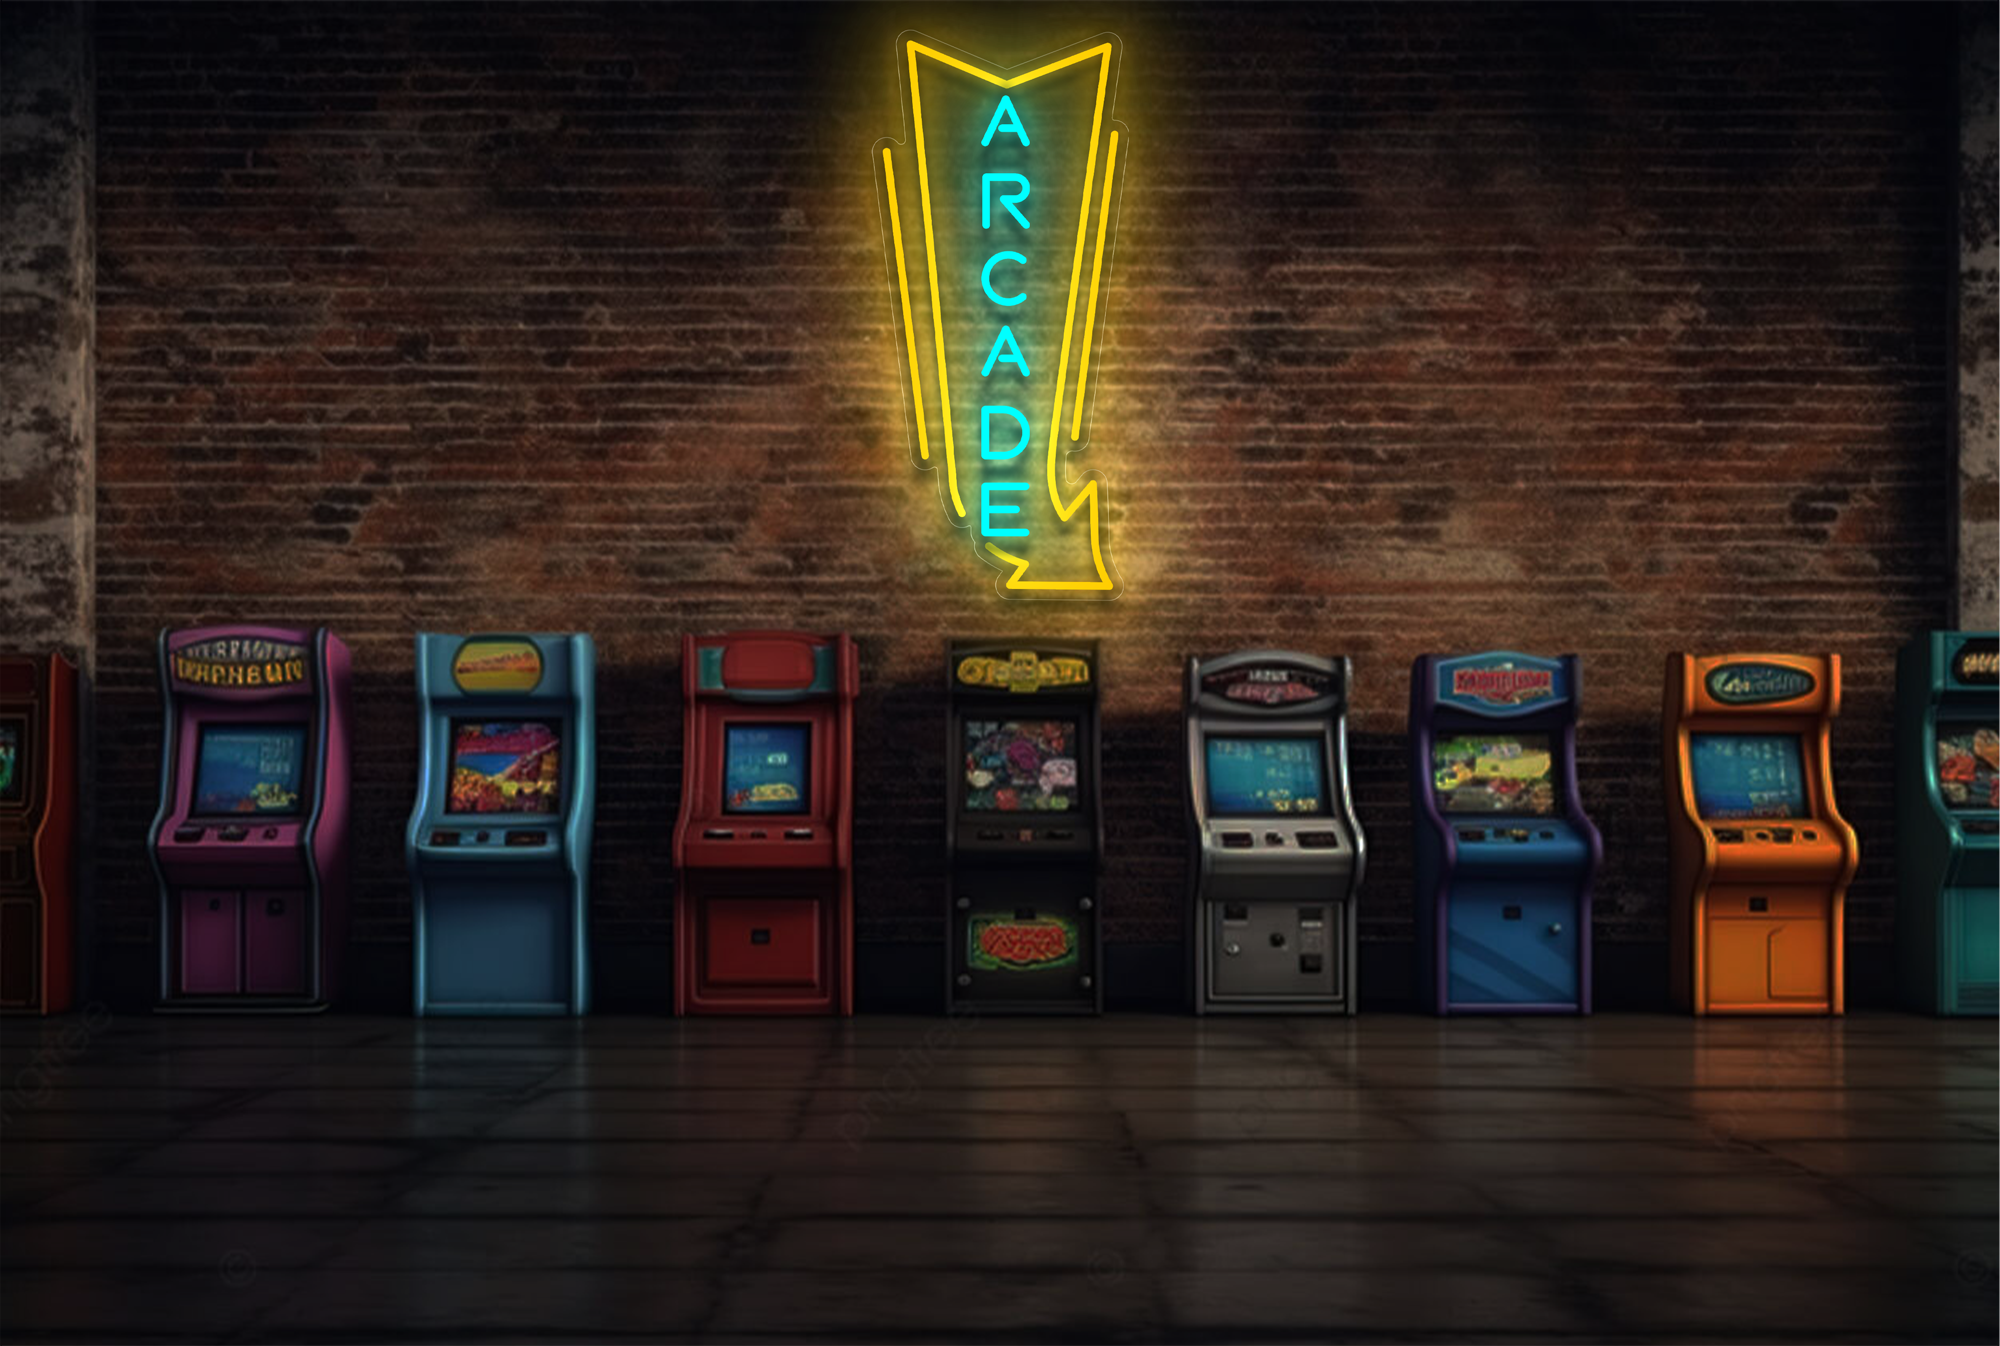 "Arcade" with Arrow Pointing Left LED Neon Sign